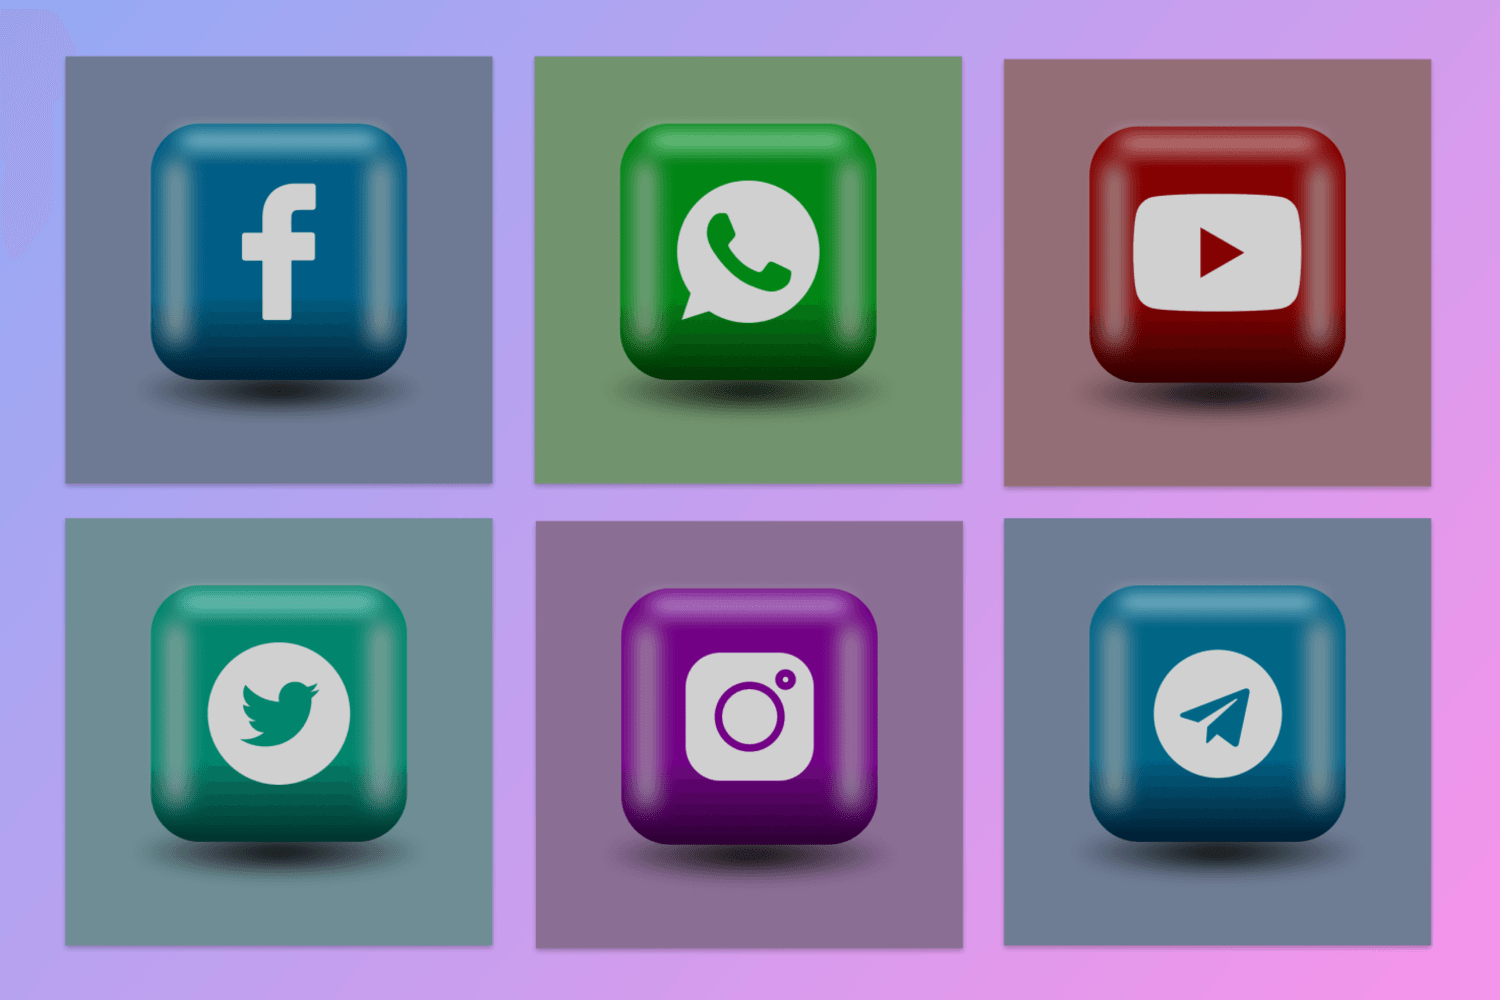 Social media button designs in colorful 3D styles